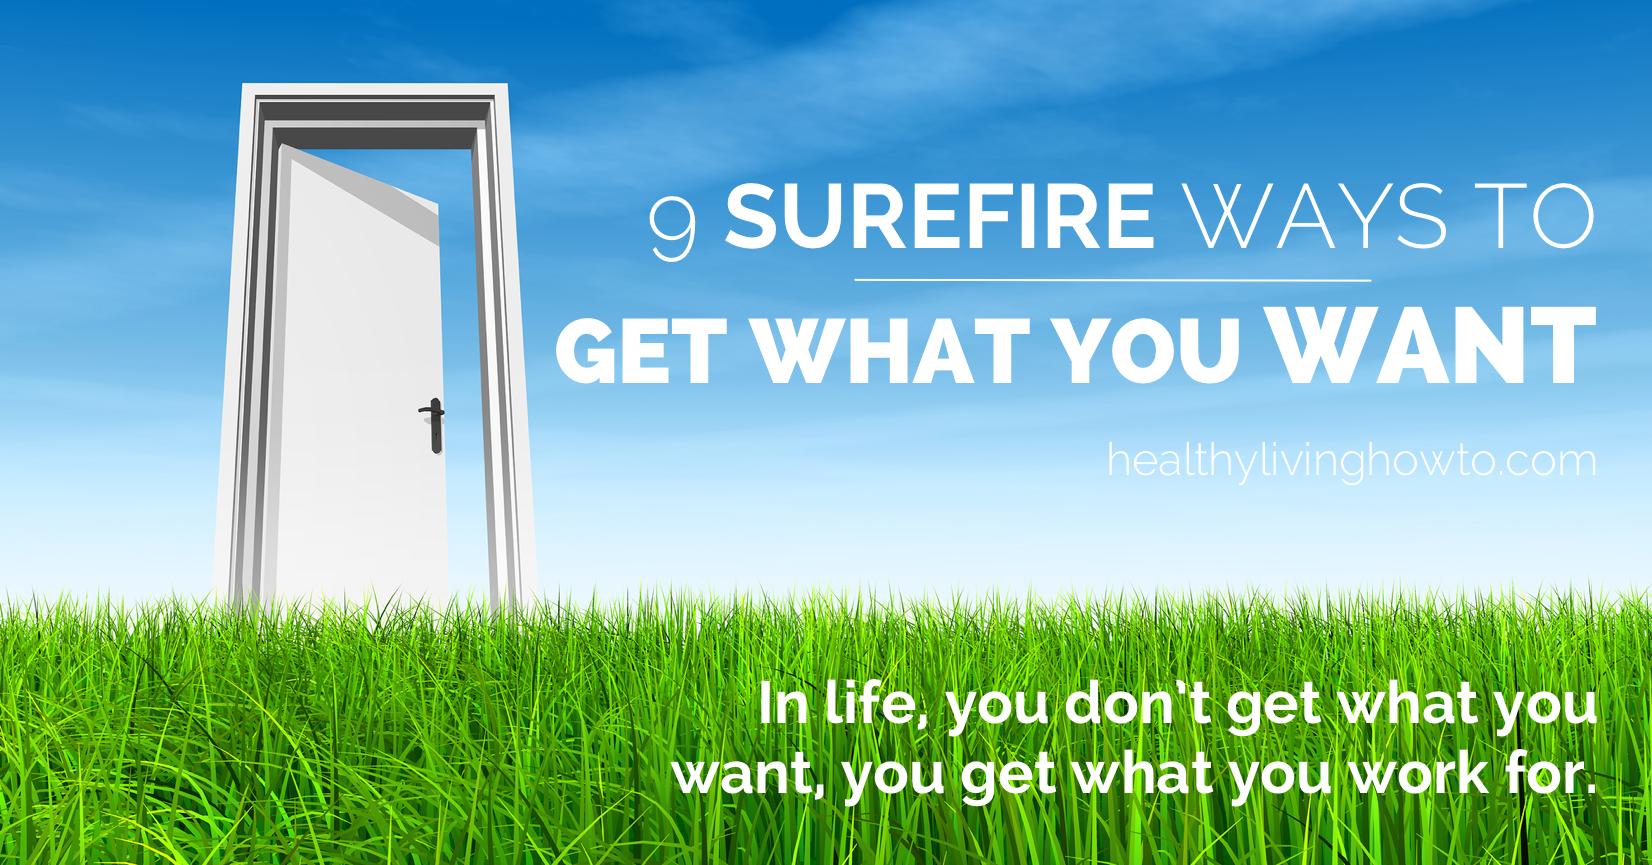 9 Surefire Ways To Get What You Want | healthylivinghowto.com